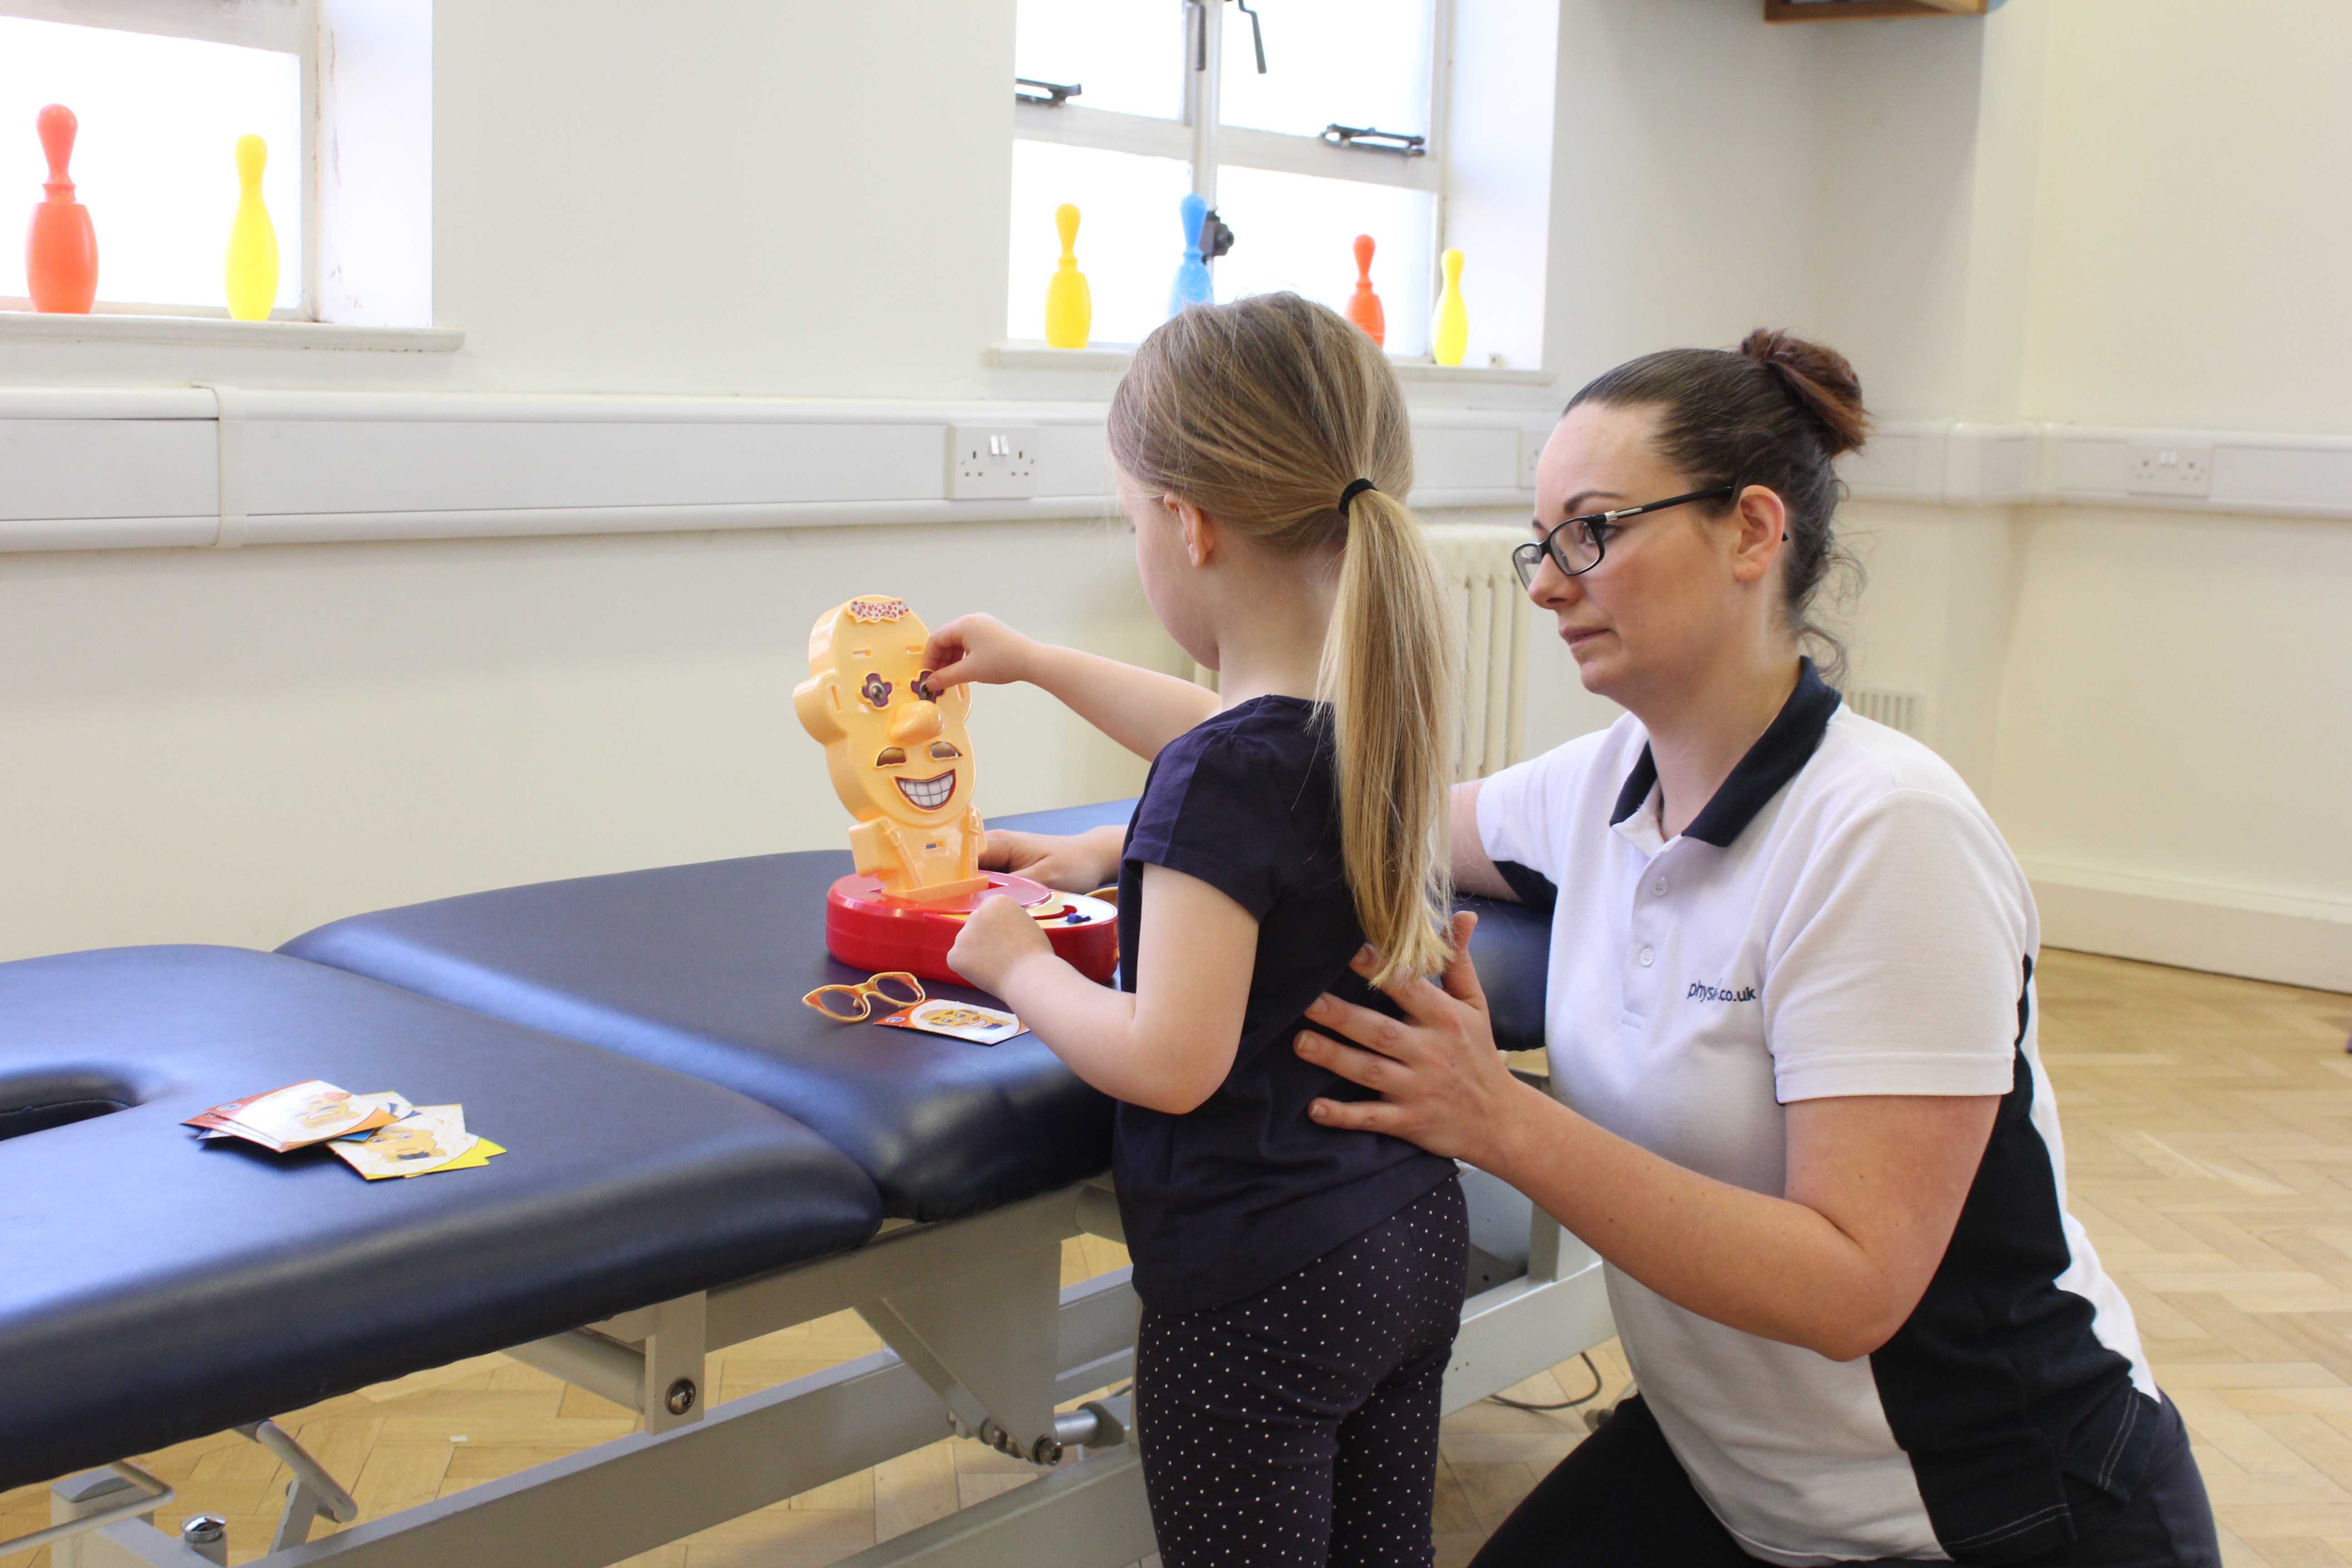 Functional fine motor skill exercises supervised by a neurological physiotherapist